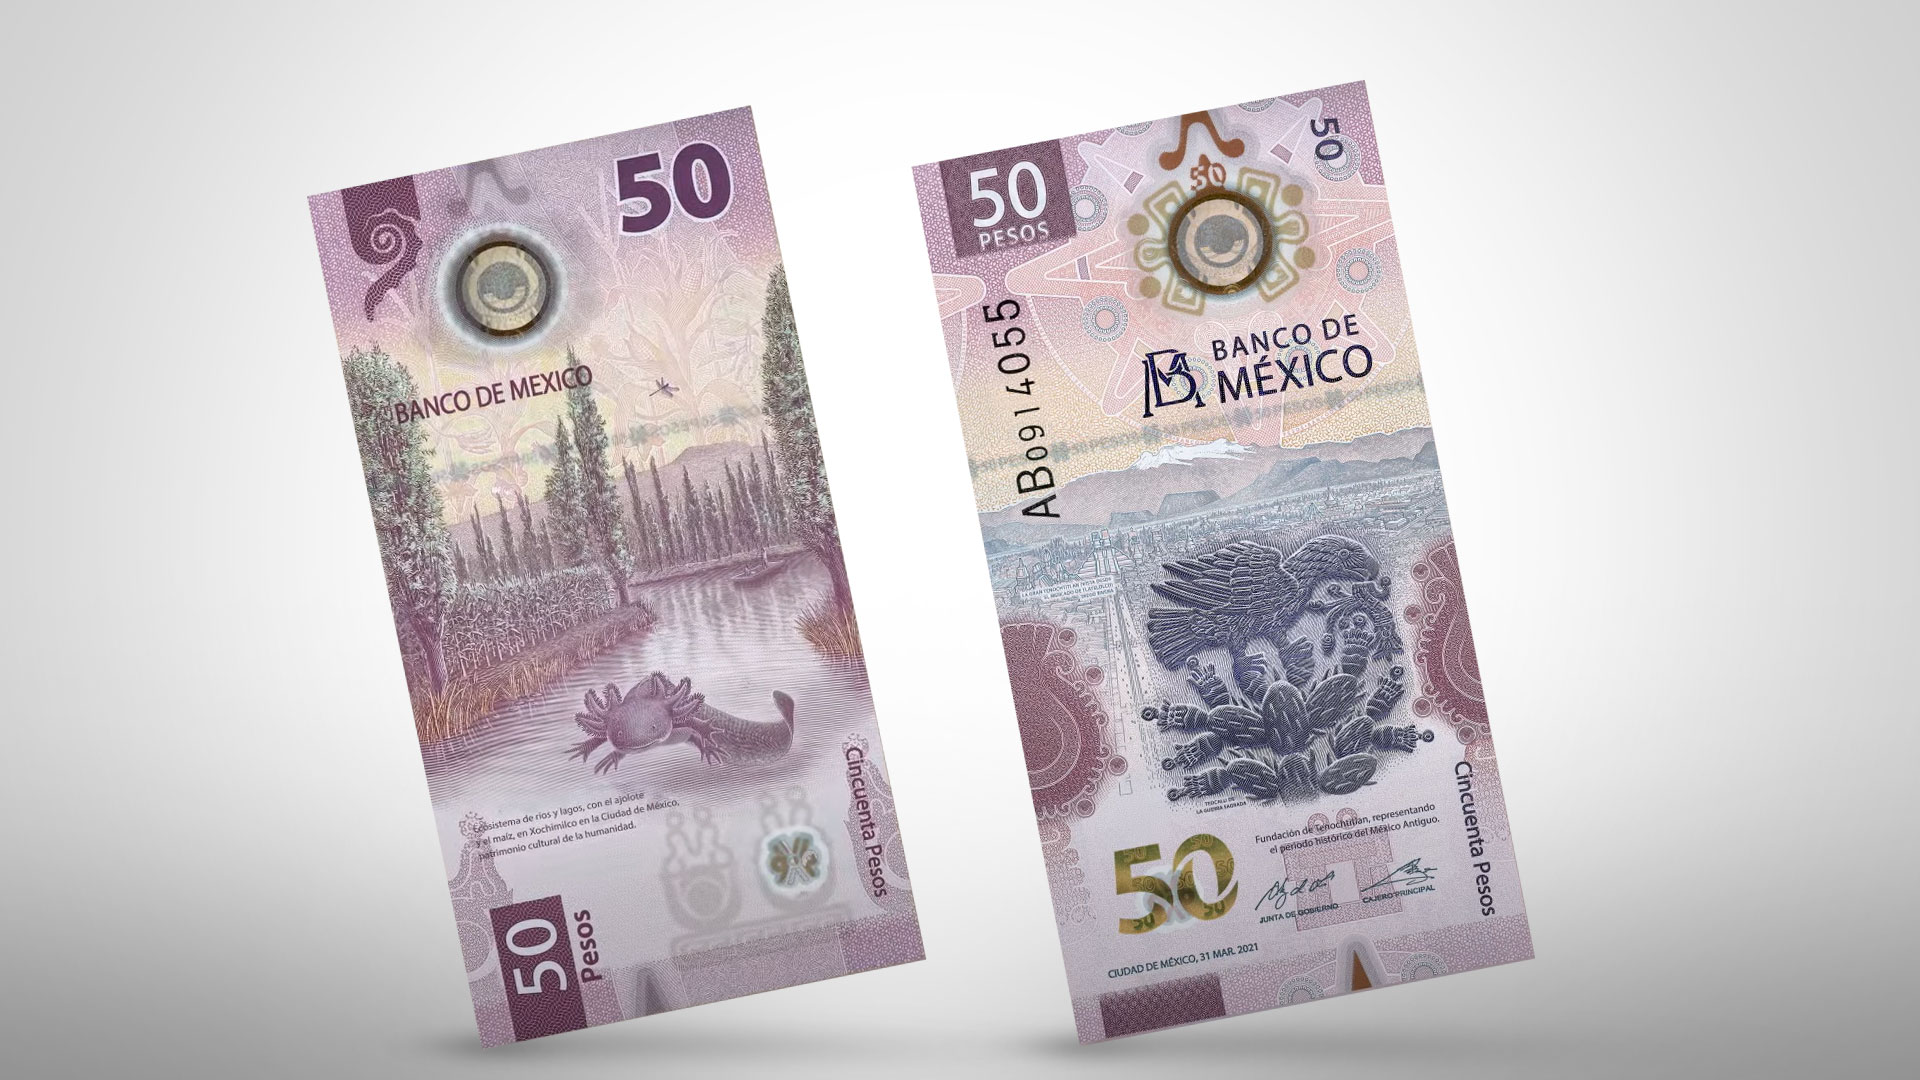 BANKNOTE MEXICO 500 PESOS (CURRENTLY ON CIRCULATION)